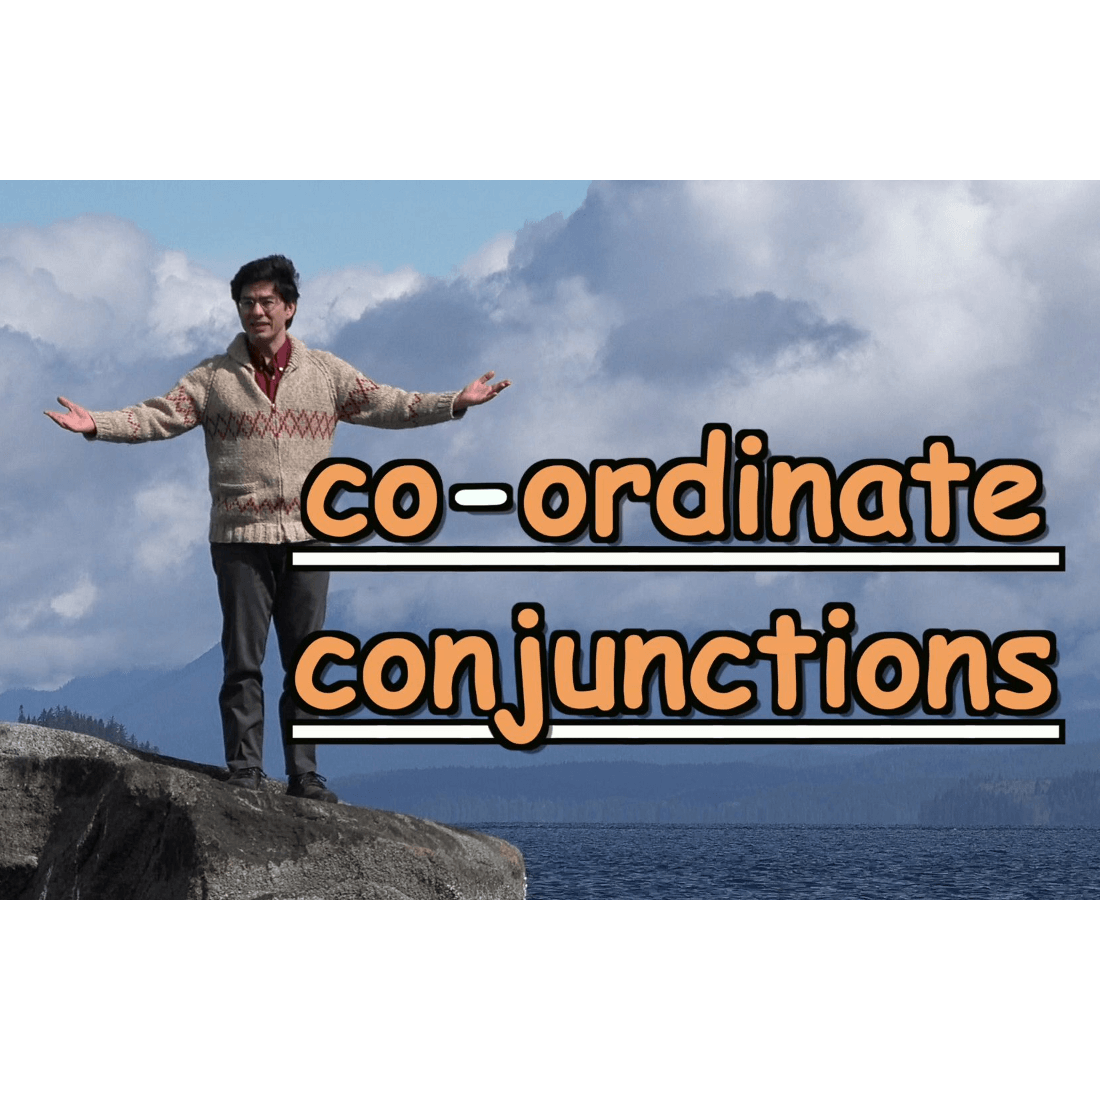 conjunctions-parts-of-speech-advanced-grammar-types-of-conjunctions-with-examples-youtube